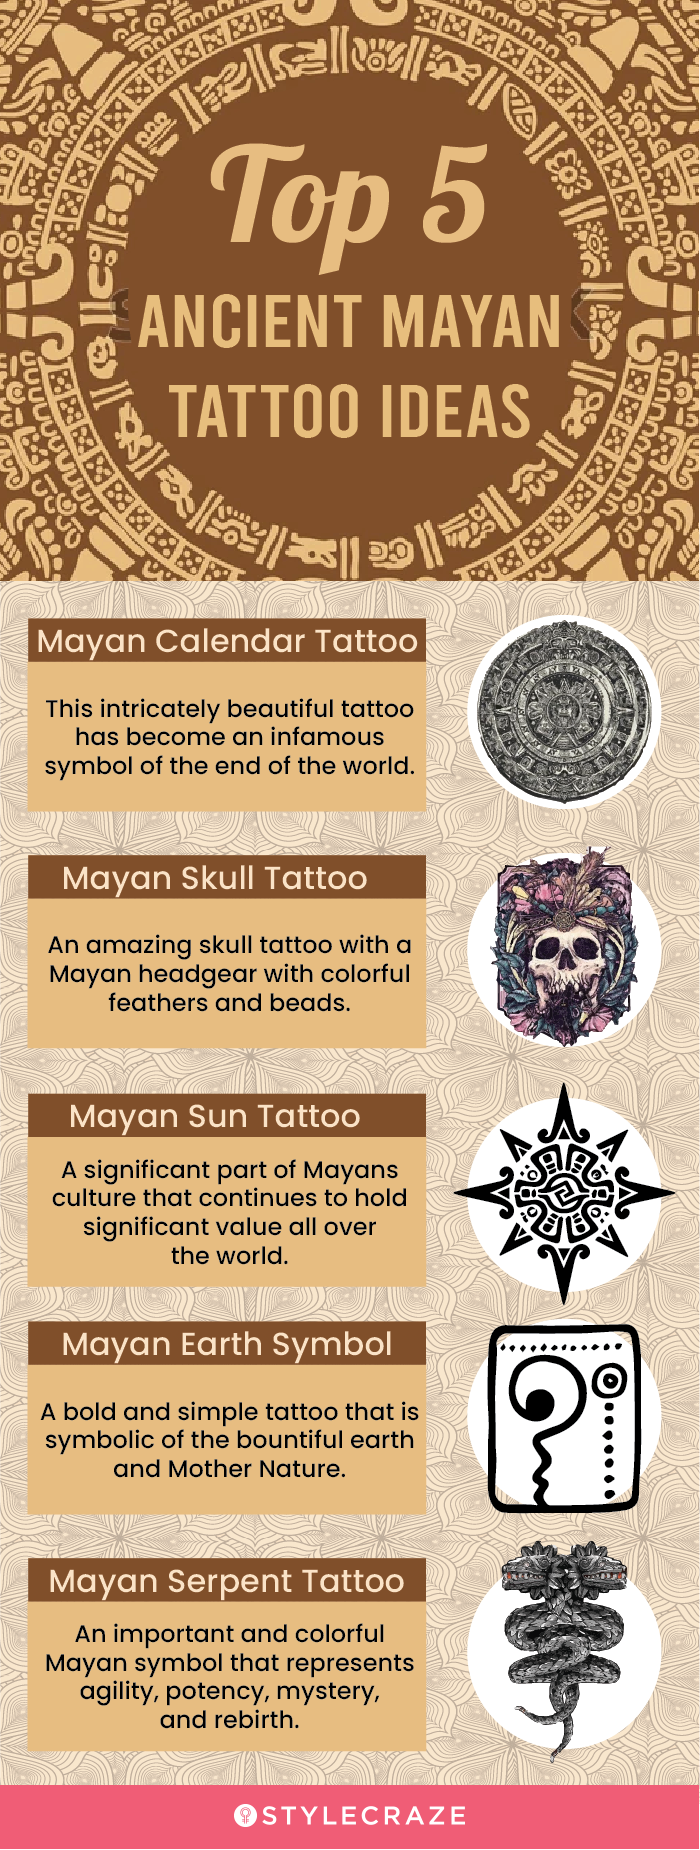 top 5 ancient mayan tattoo ideas (infographic)